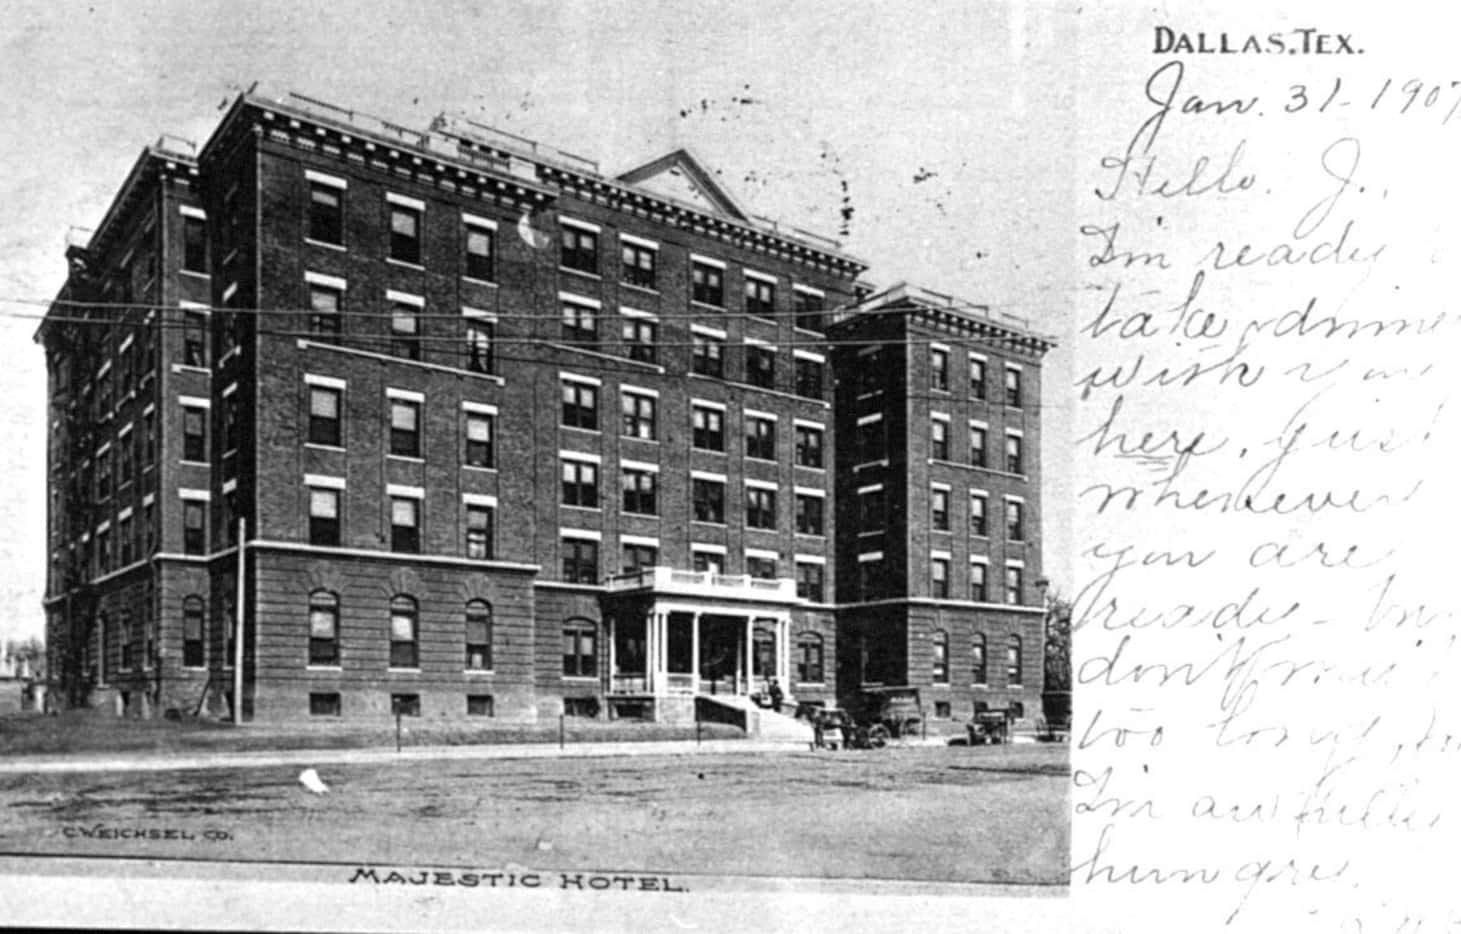 The Majestic Hotel, later known as the Ambassador Hotel, is shown on a postcard with a...